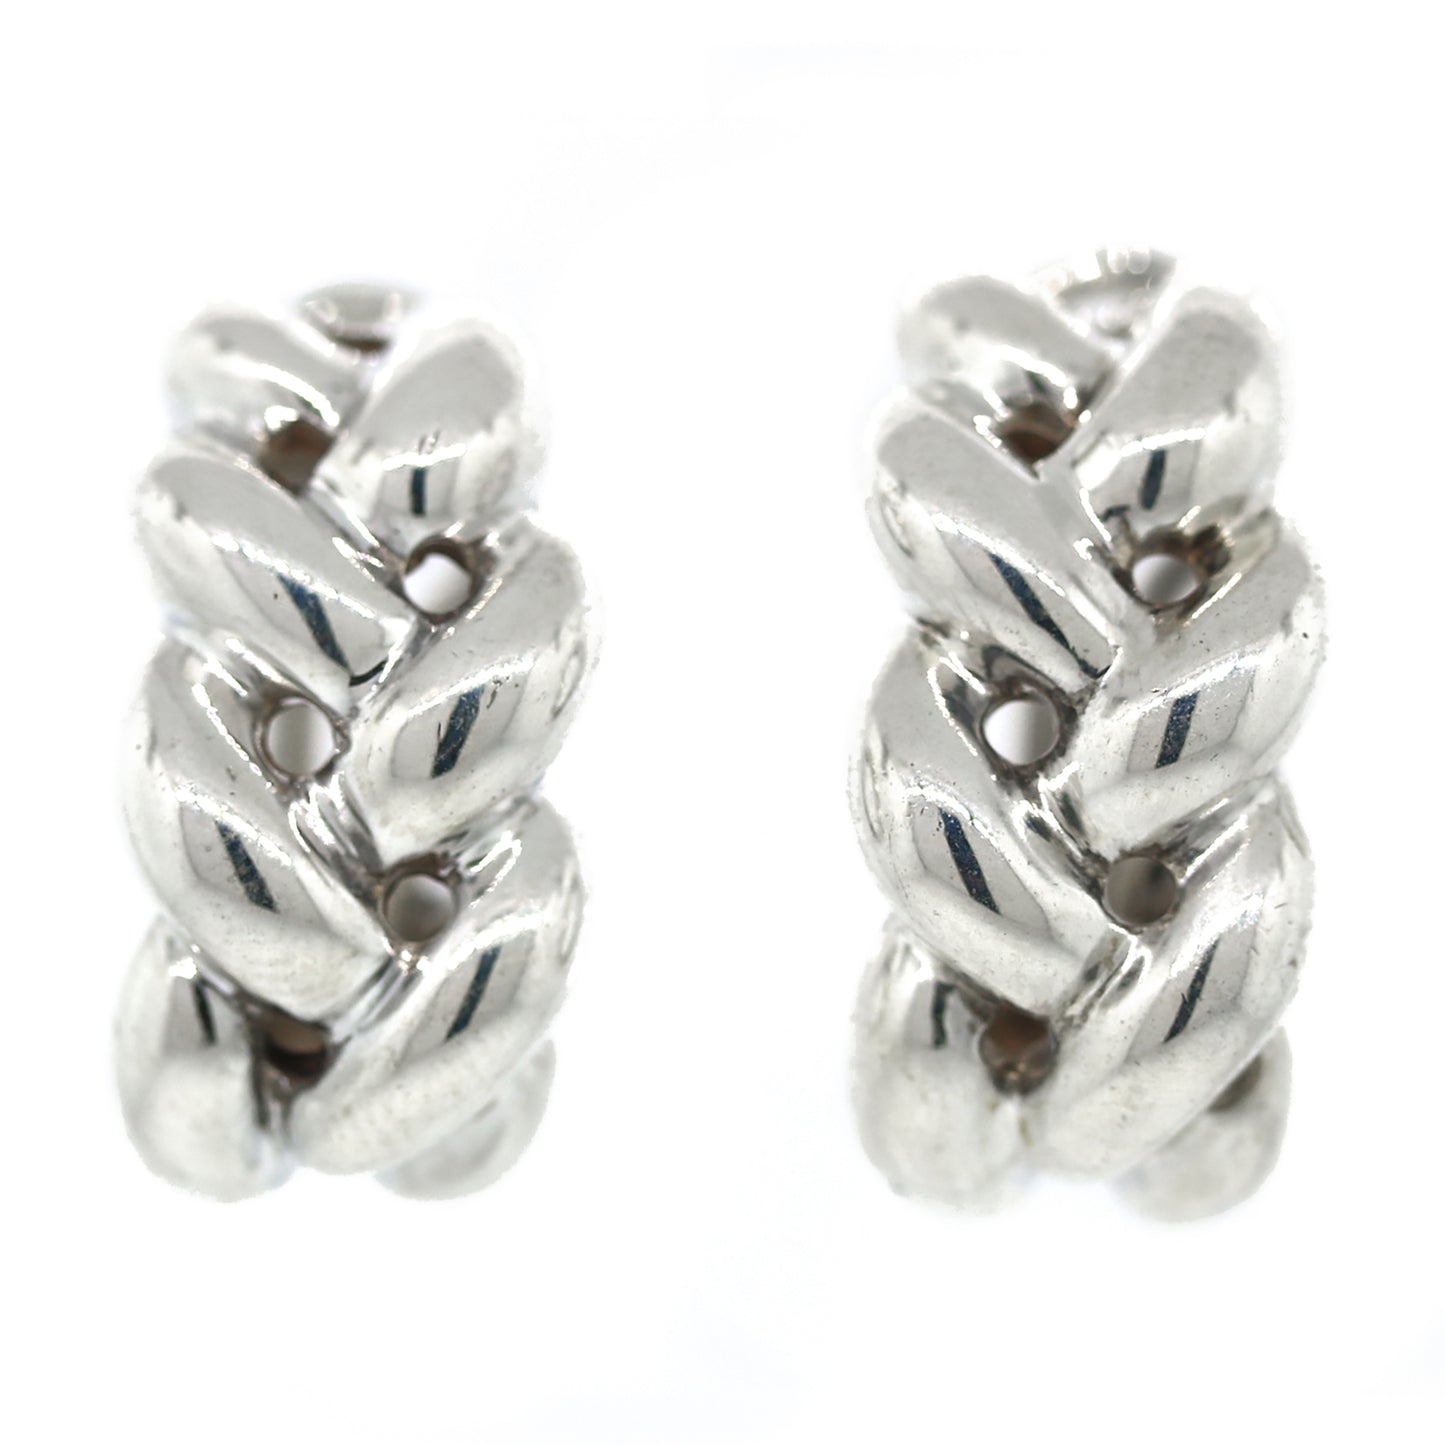 Tiffany and Co. Twisted Braided Earrings in Sterling Silver